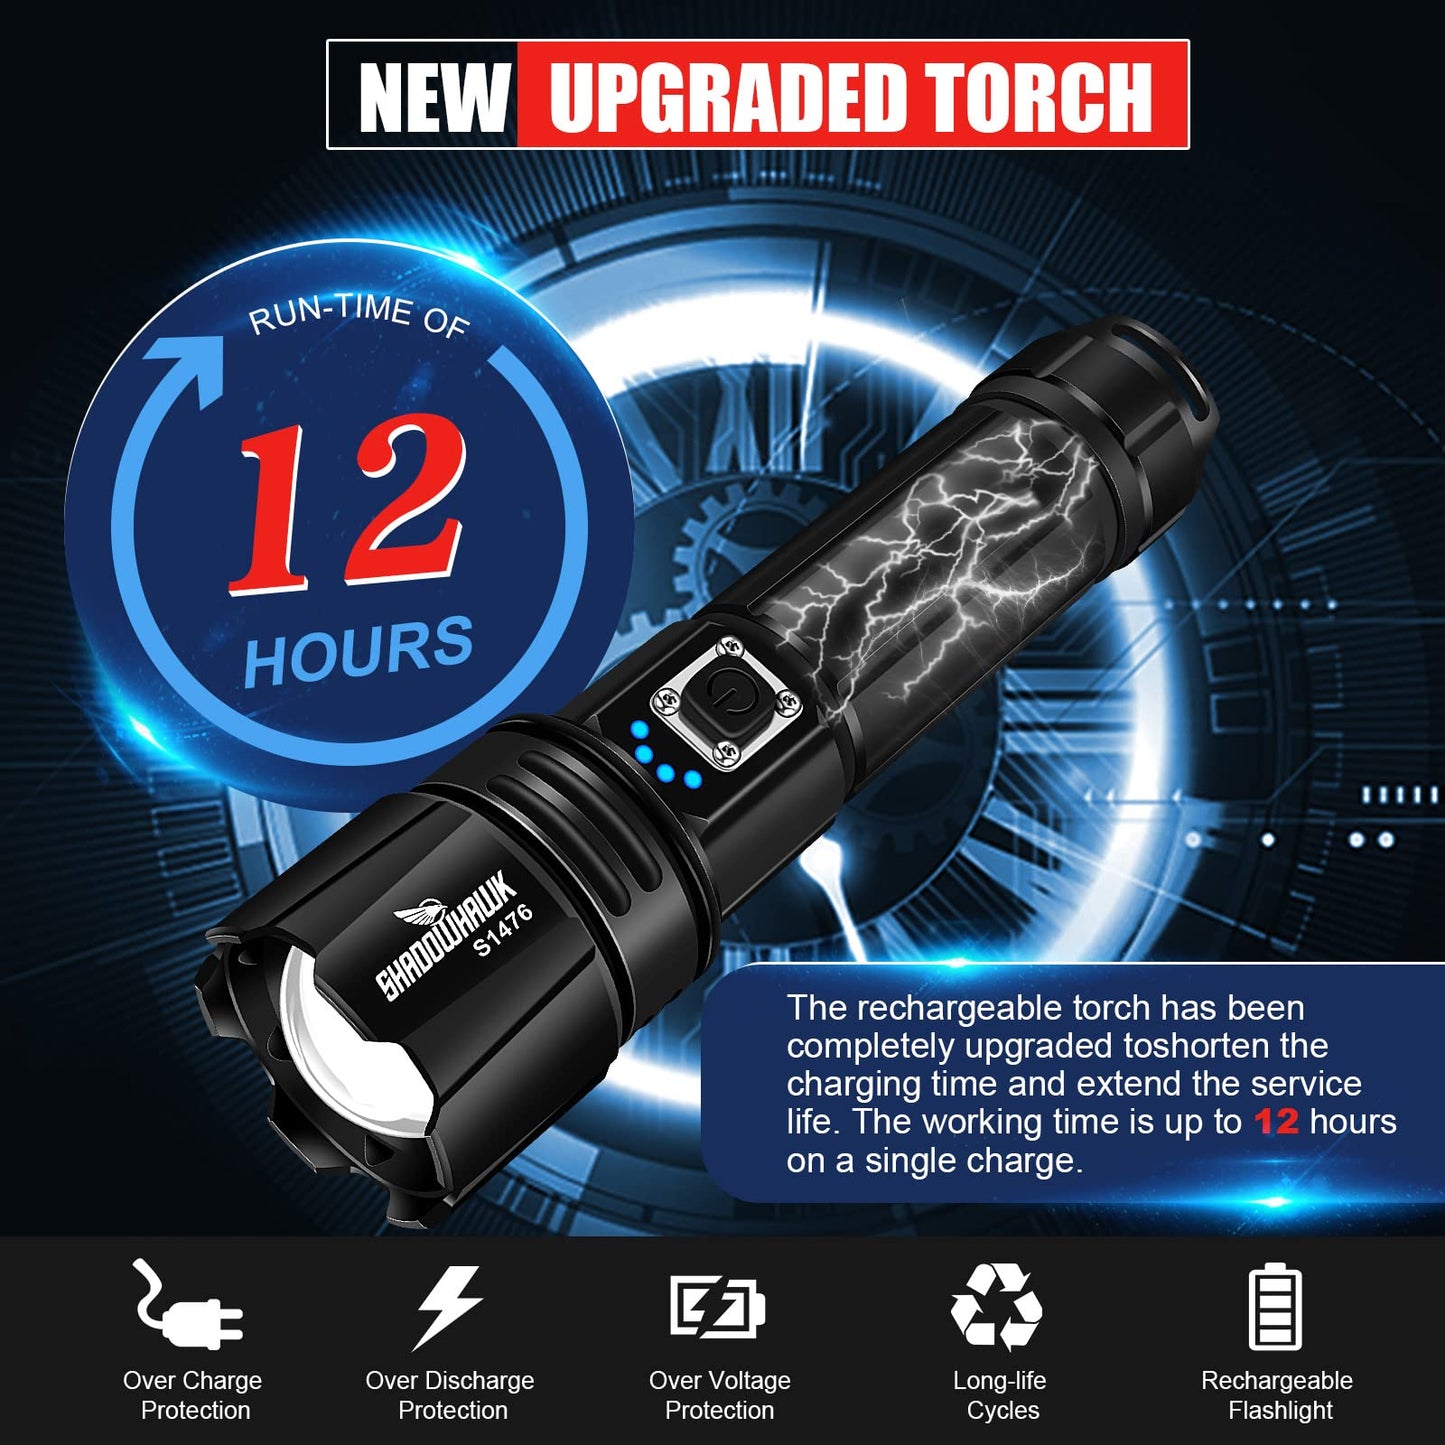 Re-chargeableTorch with 12 hours of run-time